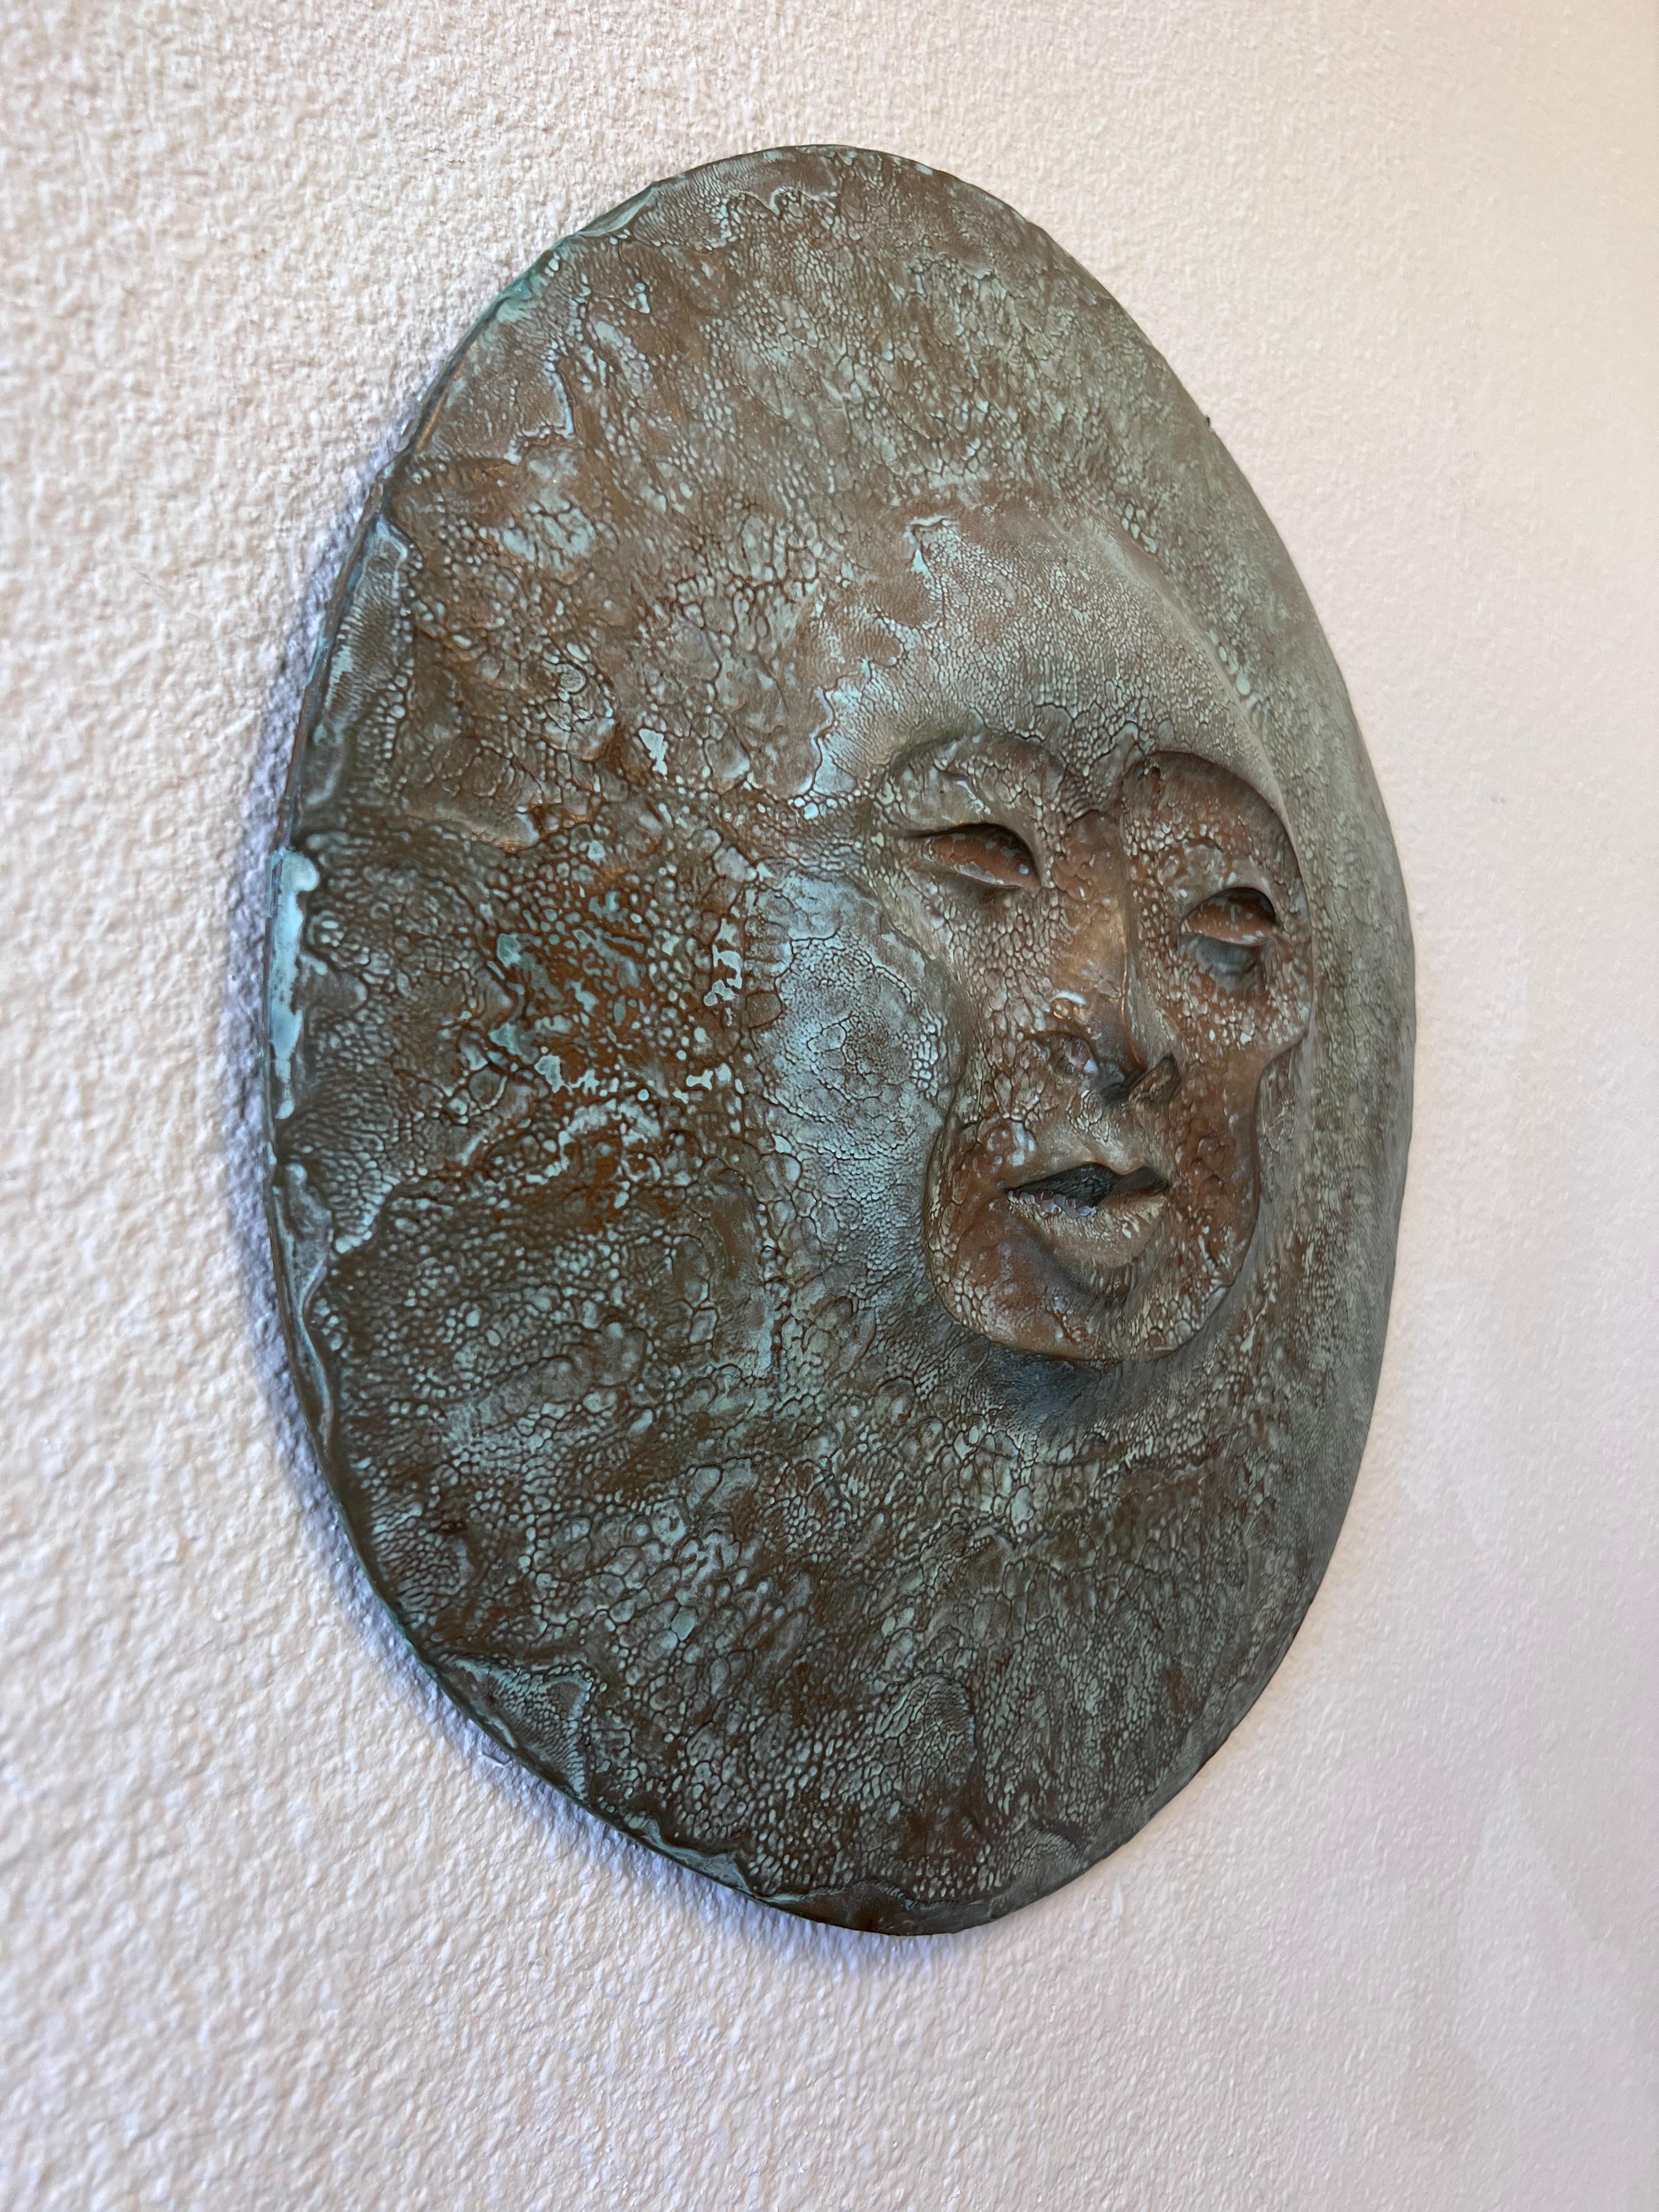 Cool 1970’s faux bronze sun face wall sculpture. 
We believe it’s cast resin with a patinated bronze finish. In good original vintage condition.